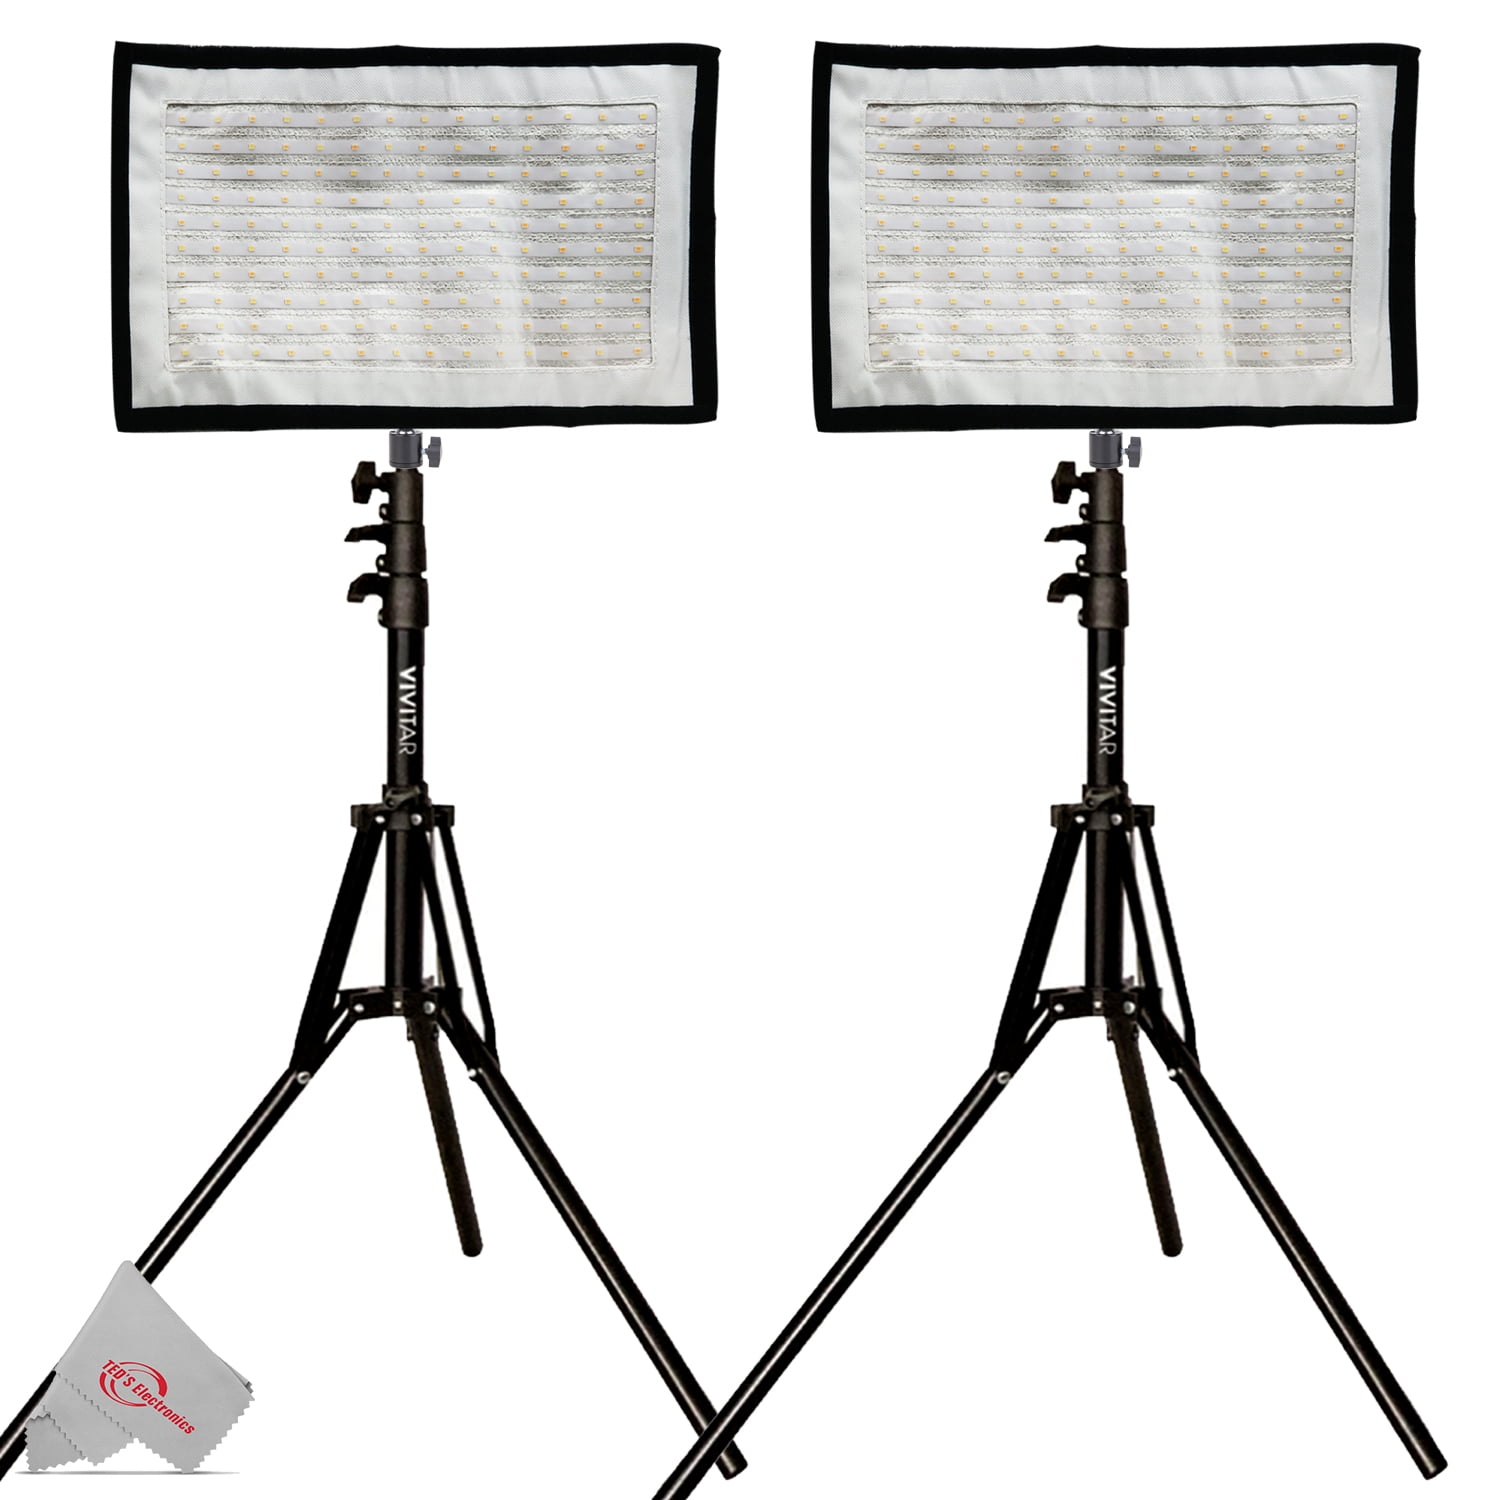 2x Vivitar Fabric LED Light Panel with Remote upto 3000LM for Studio  Lighting with 63 Adjustable Light Stands